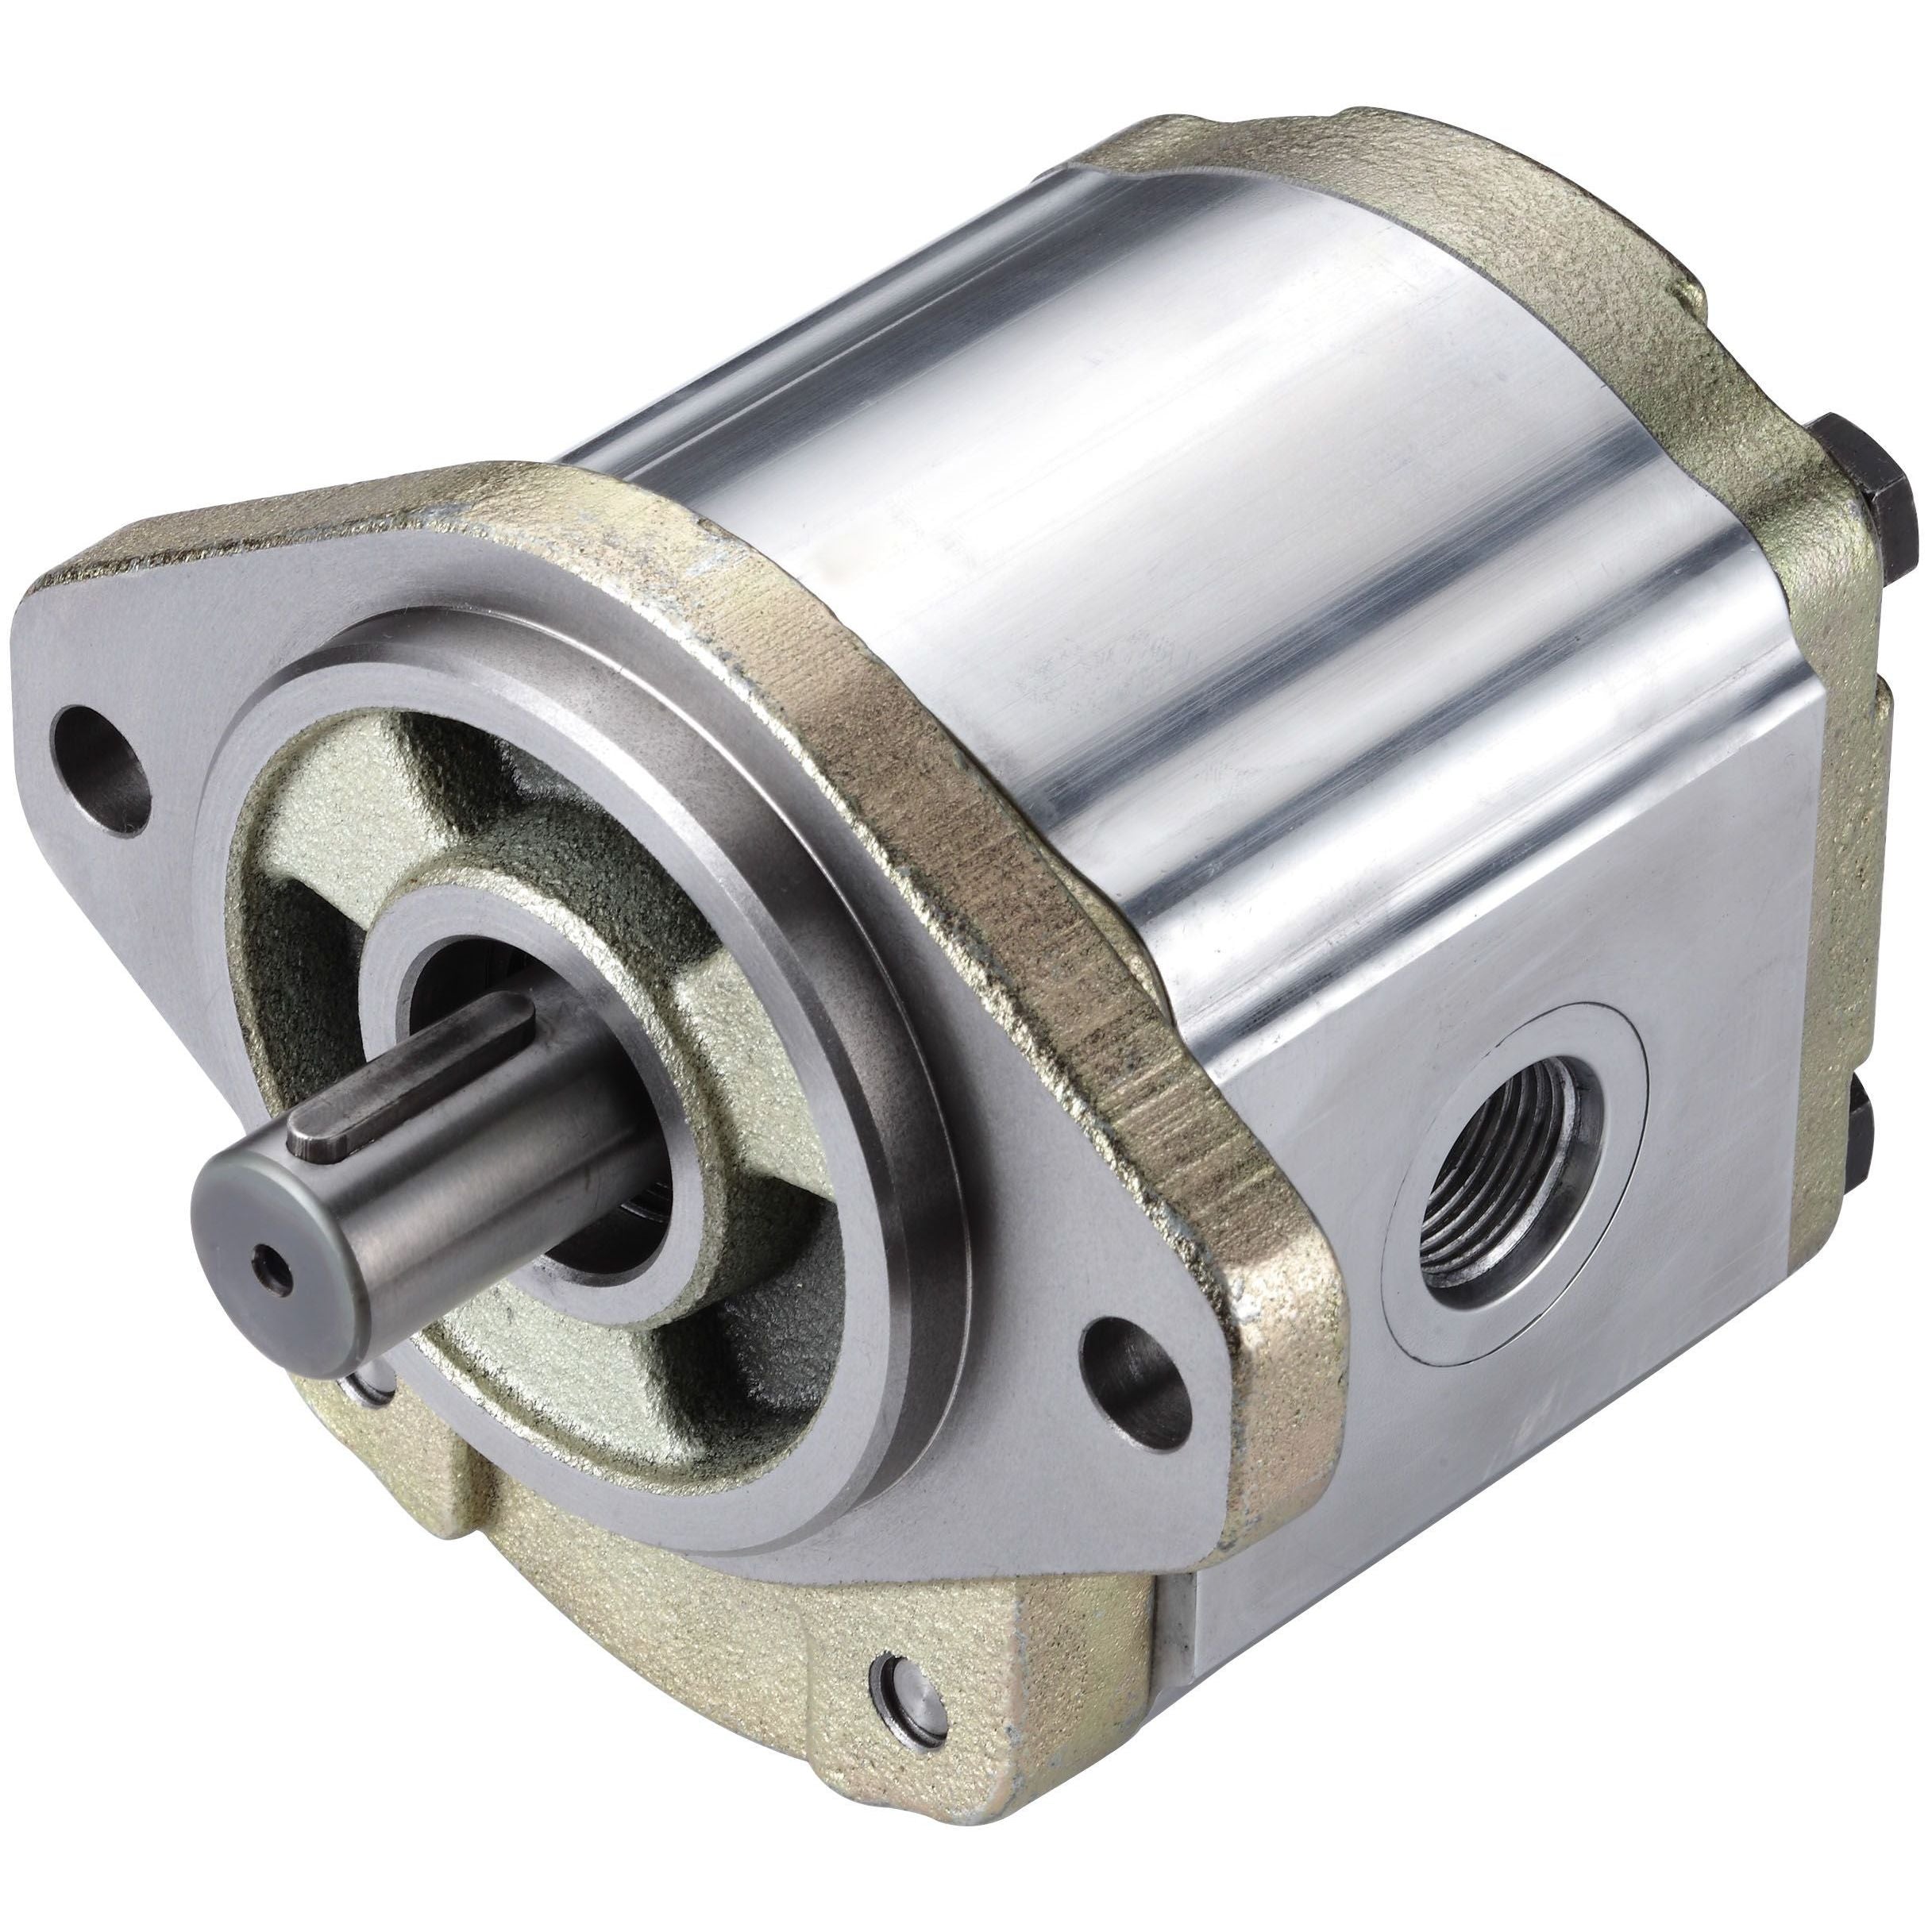 3GA5U133R : Honor Gear Pump, CW Rotation, 33cc (2.01in3), 15.69 GPM, 3500psi, 3000 RPM, #16 SAE (1") In, #12 SAE (3/4") Out, Splined Shaft 11-Tooth, 16/32 Pitch, SAE A 2-Bolt Mount